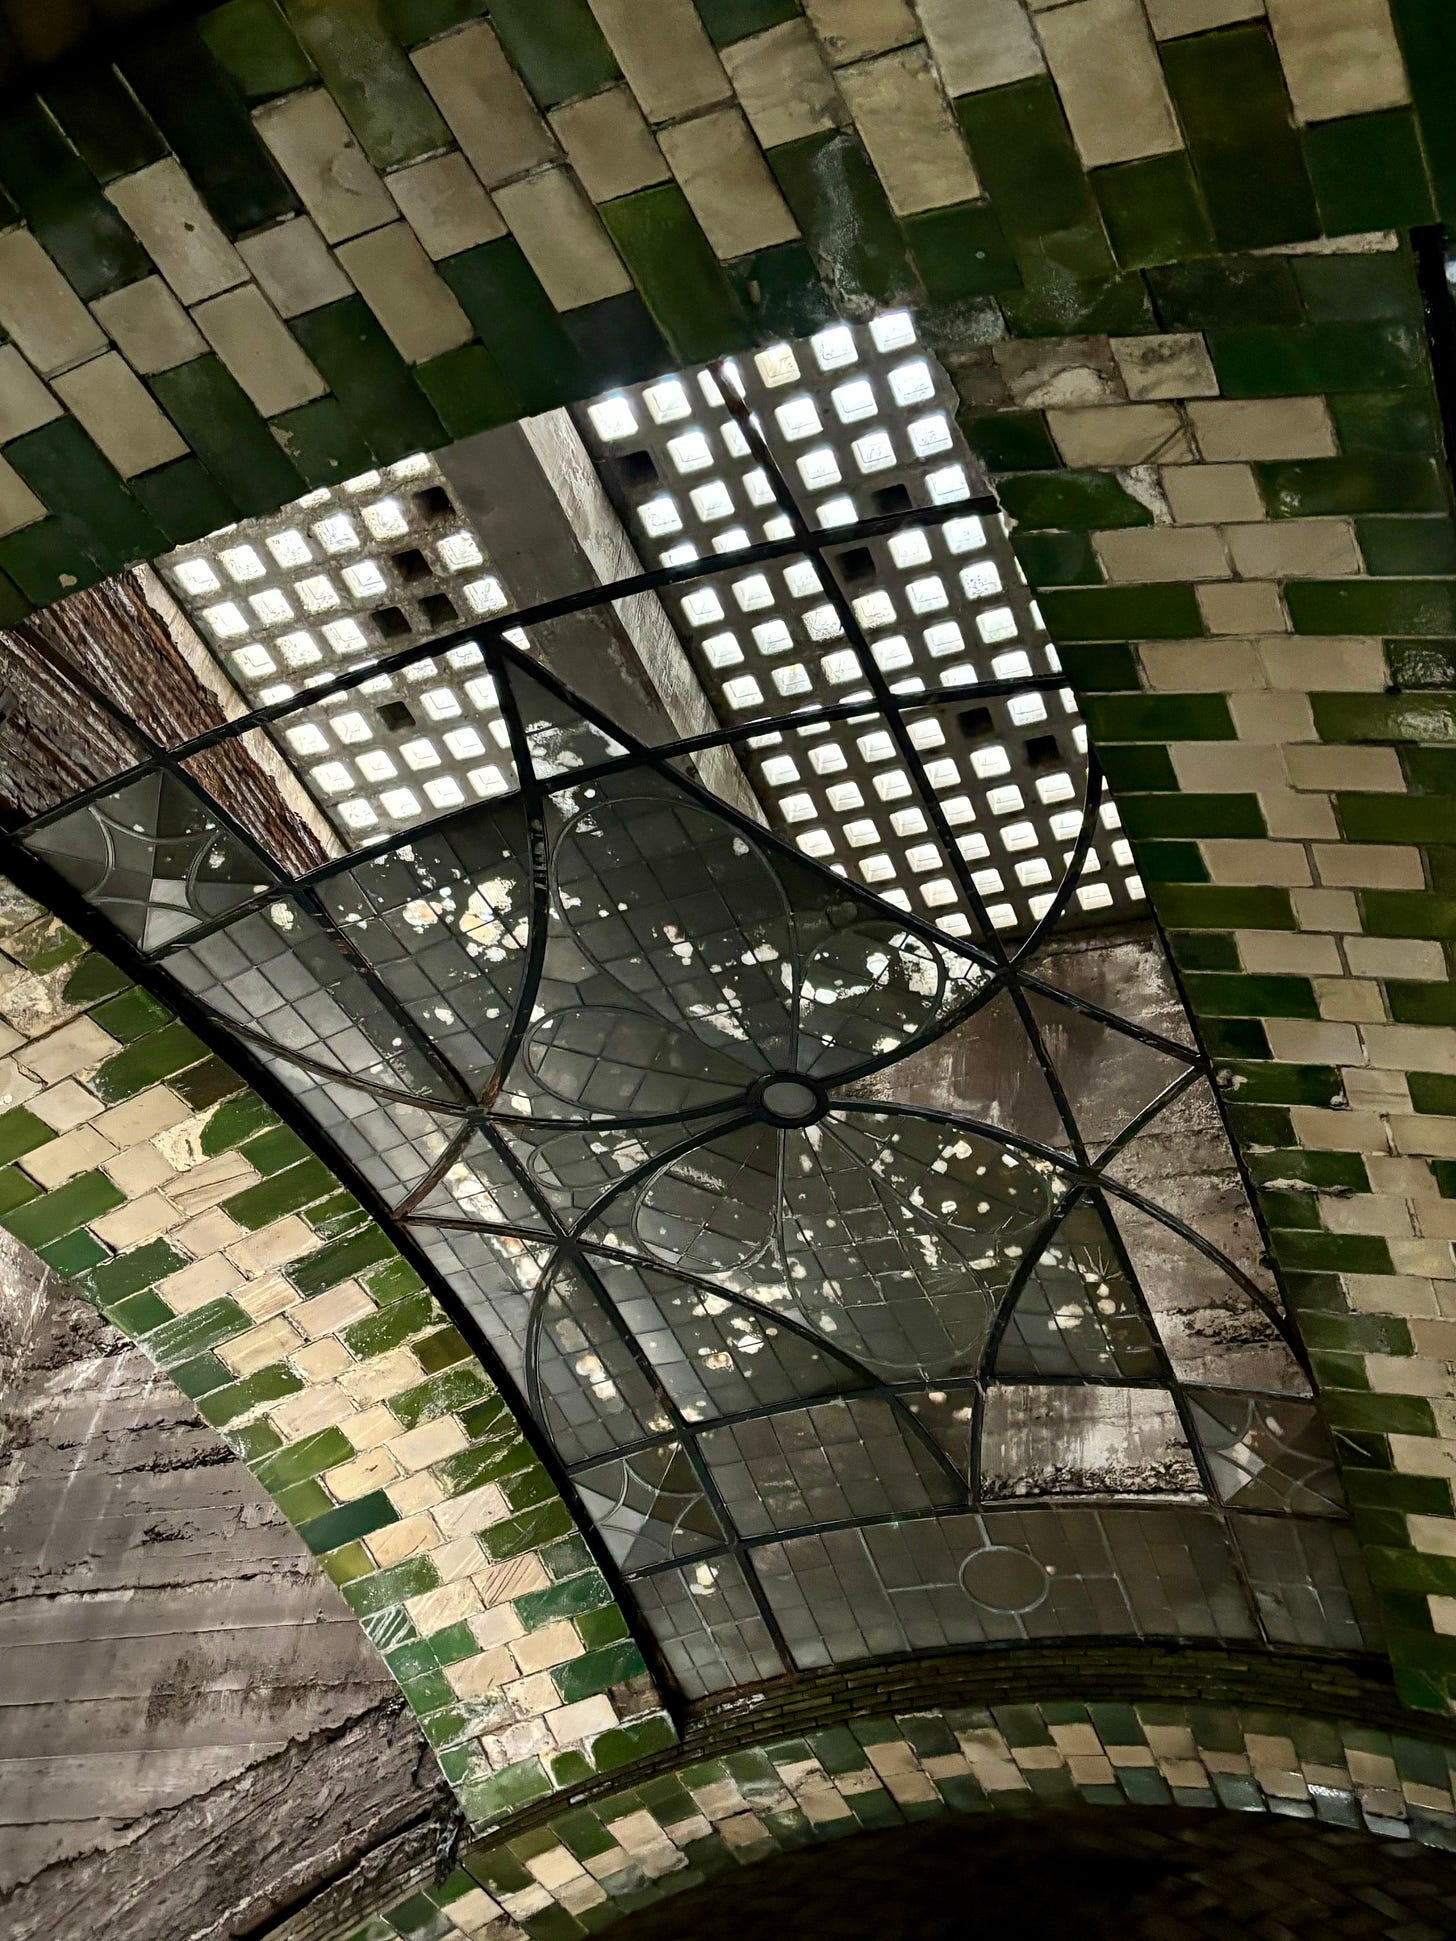 A tiled glass window in the green and white tile ceiling.